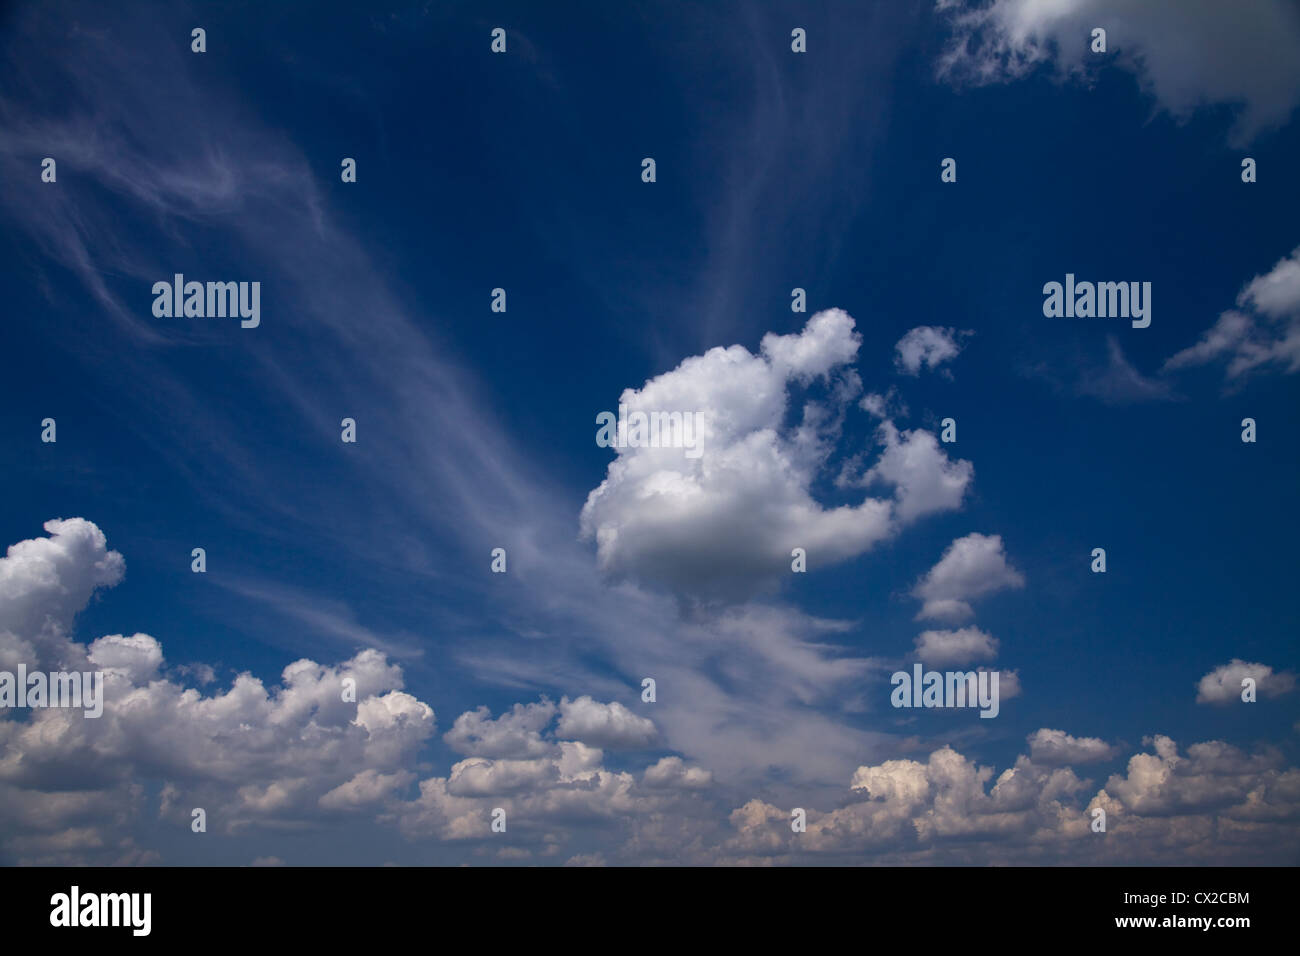 Wonderful blue dramatic sky, with some white clouds. Stock Photo